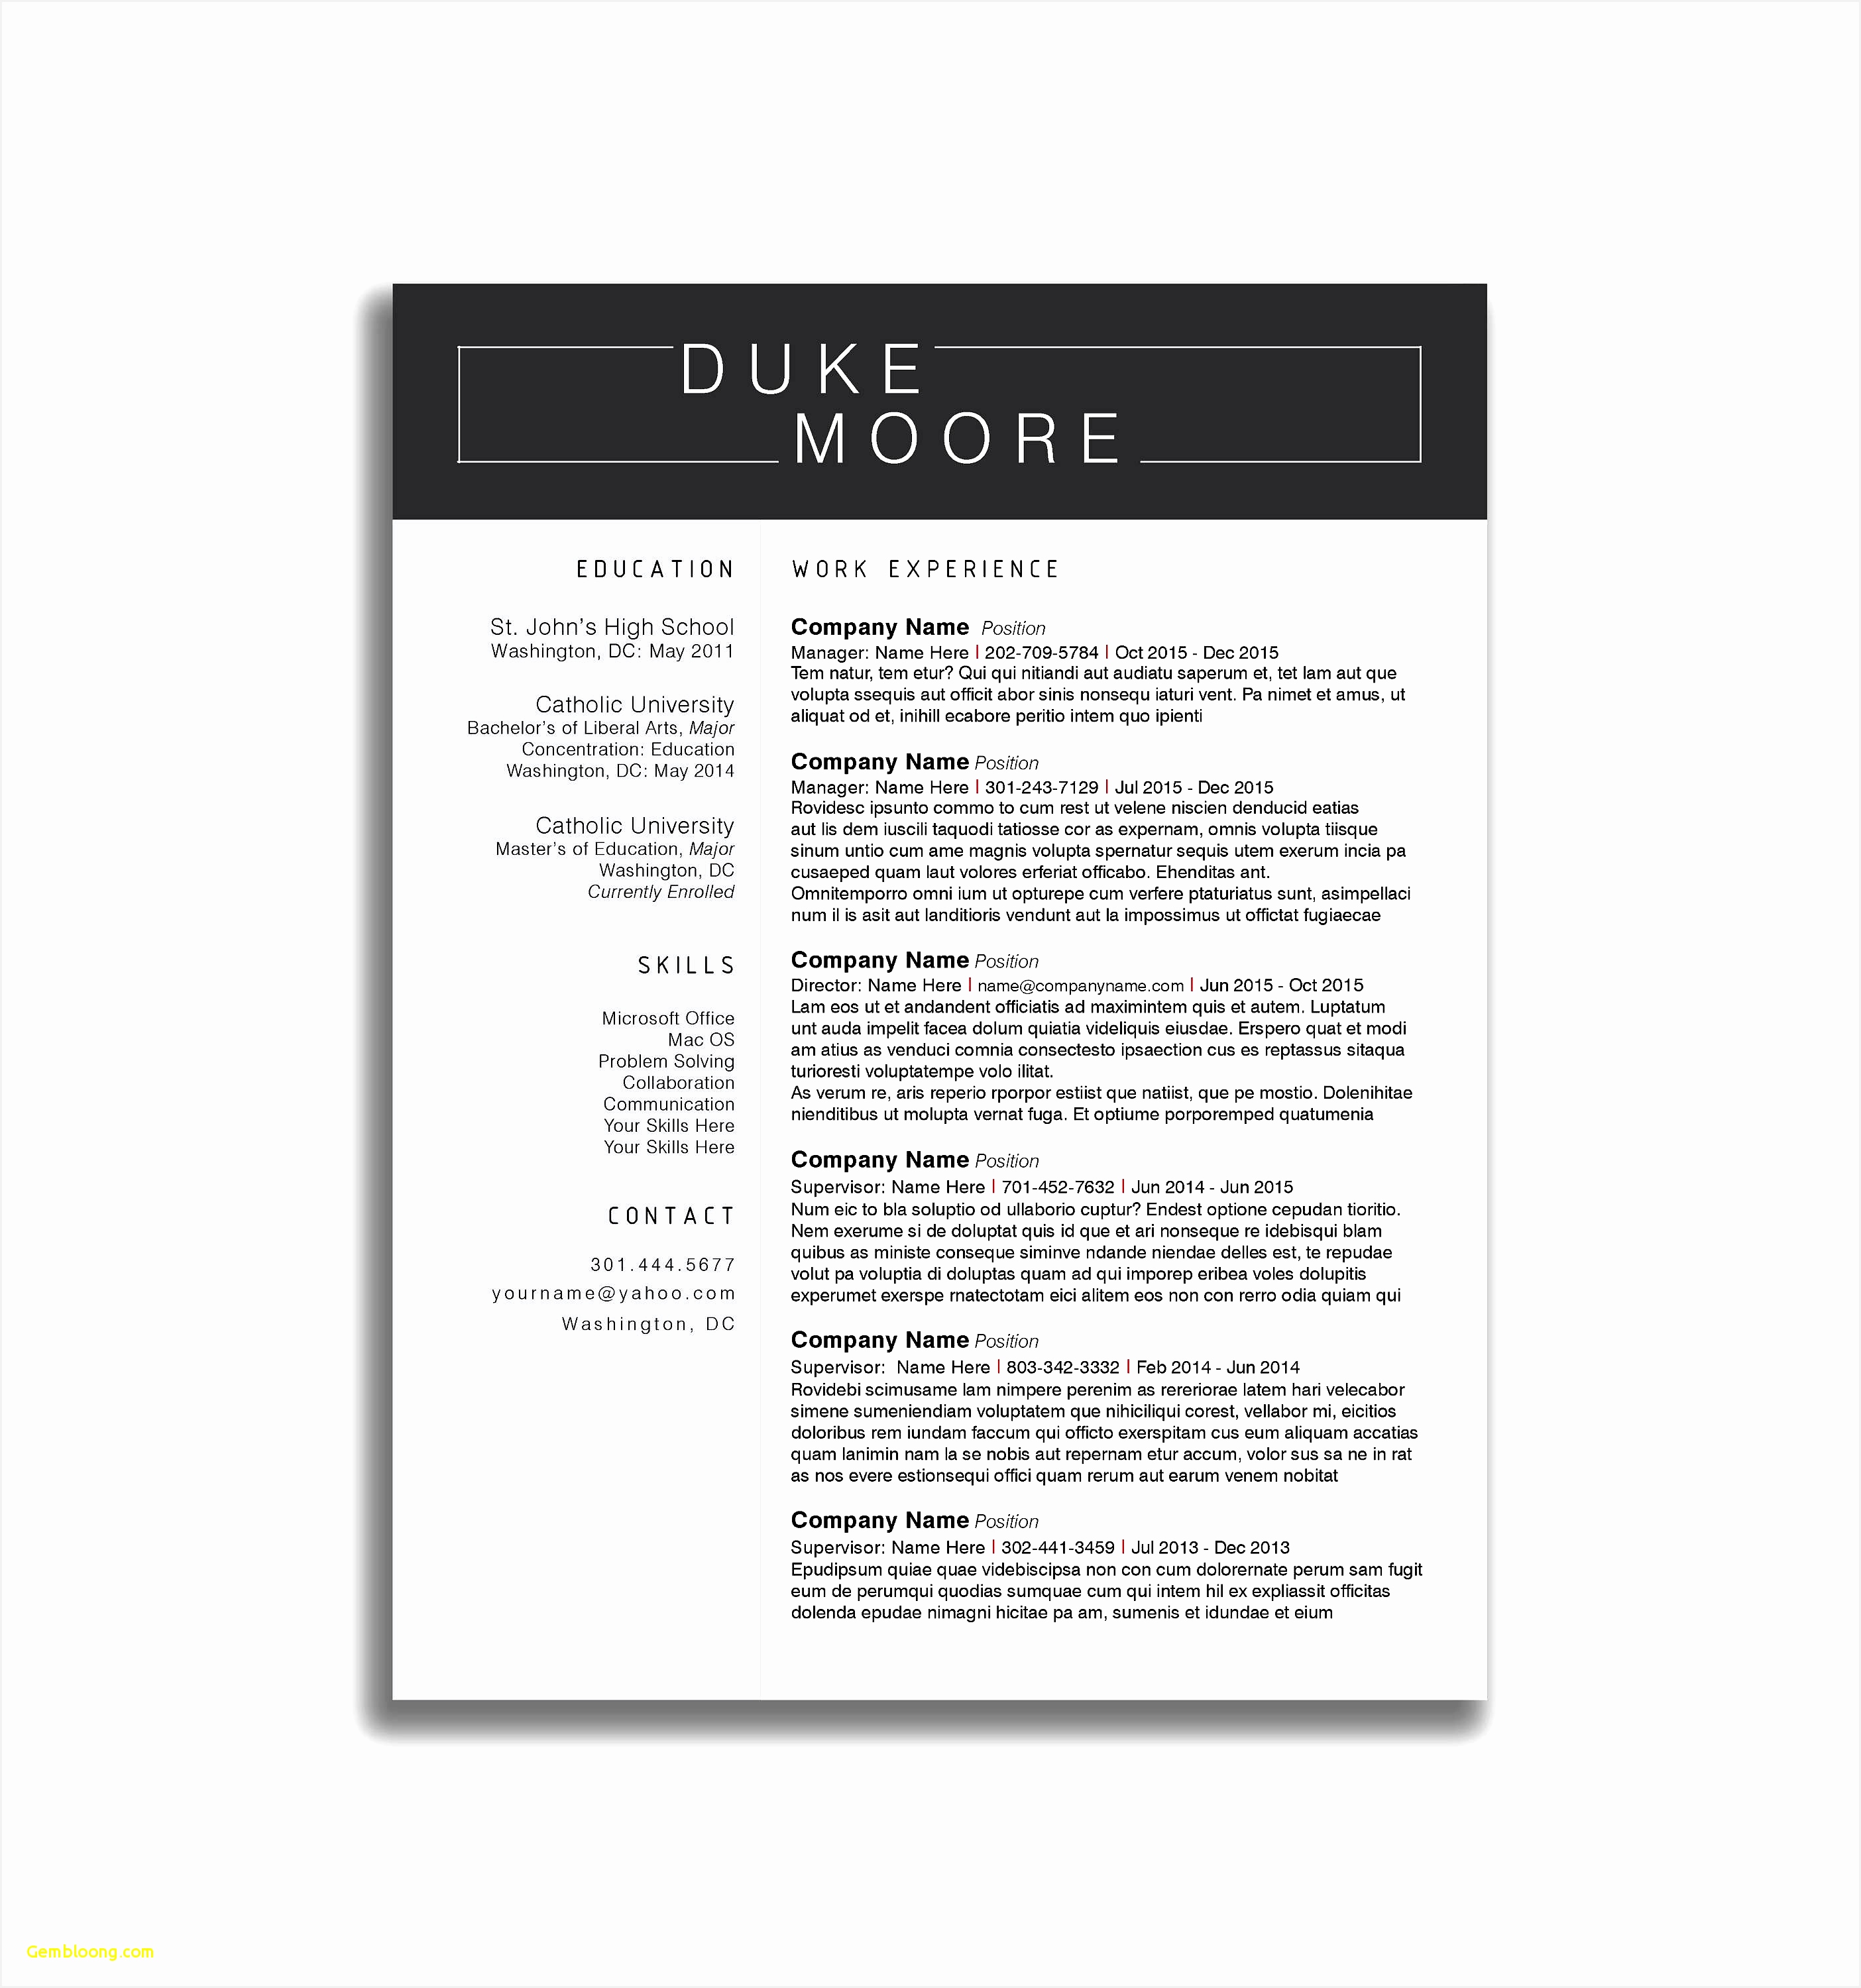 Professional Resume Template Free New Legal Resume Template Word Free Download Resume Writing Examples30002808